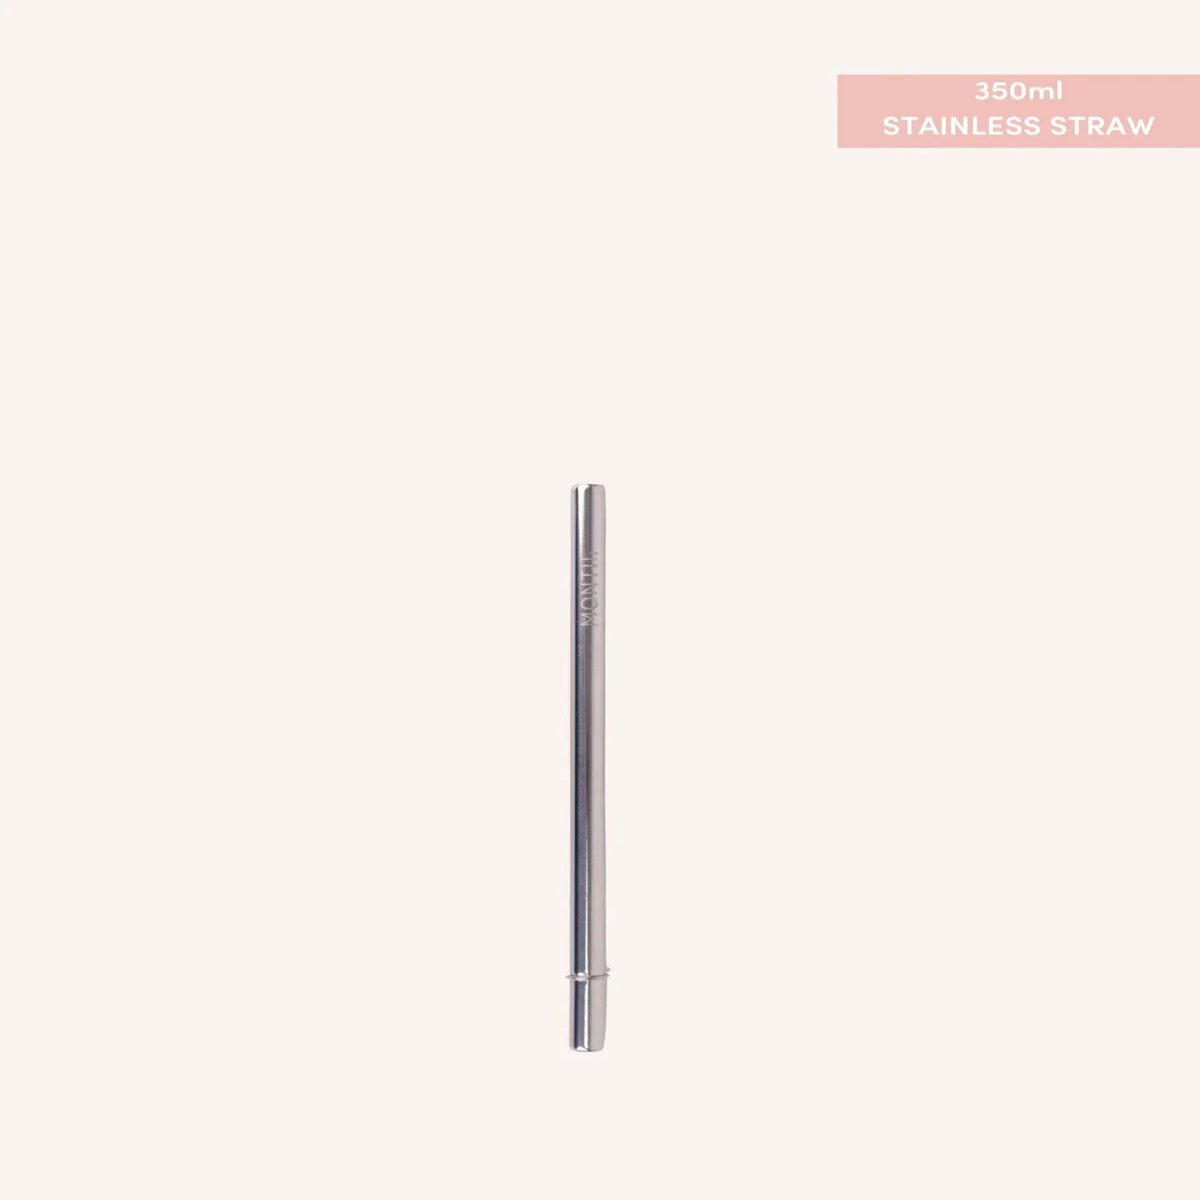 Smoothie Stainless Steel Straw